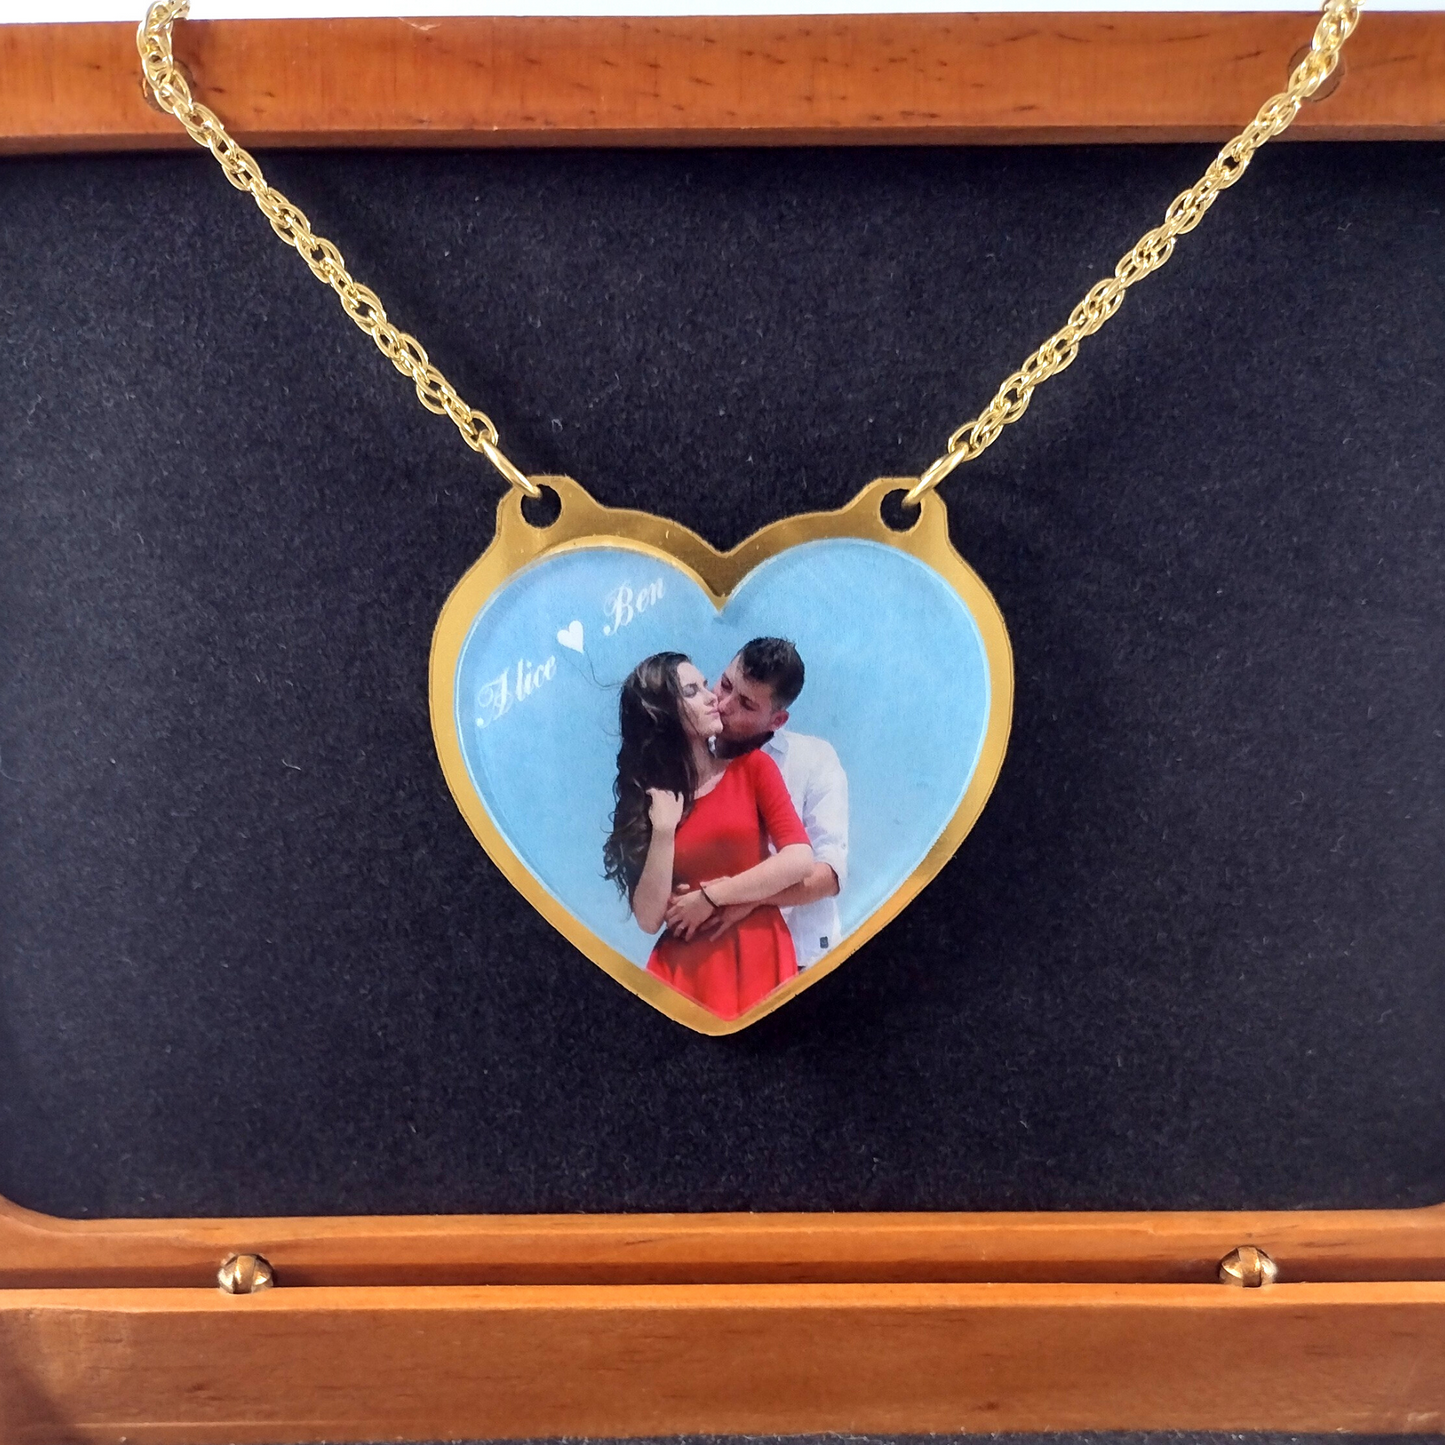 Custom Heart Shaped Personalized Photo Name Necklace and Earrings, UV Printed Jewelry Set